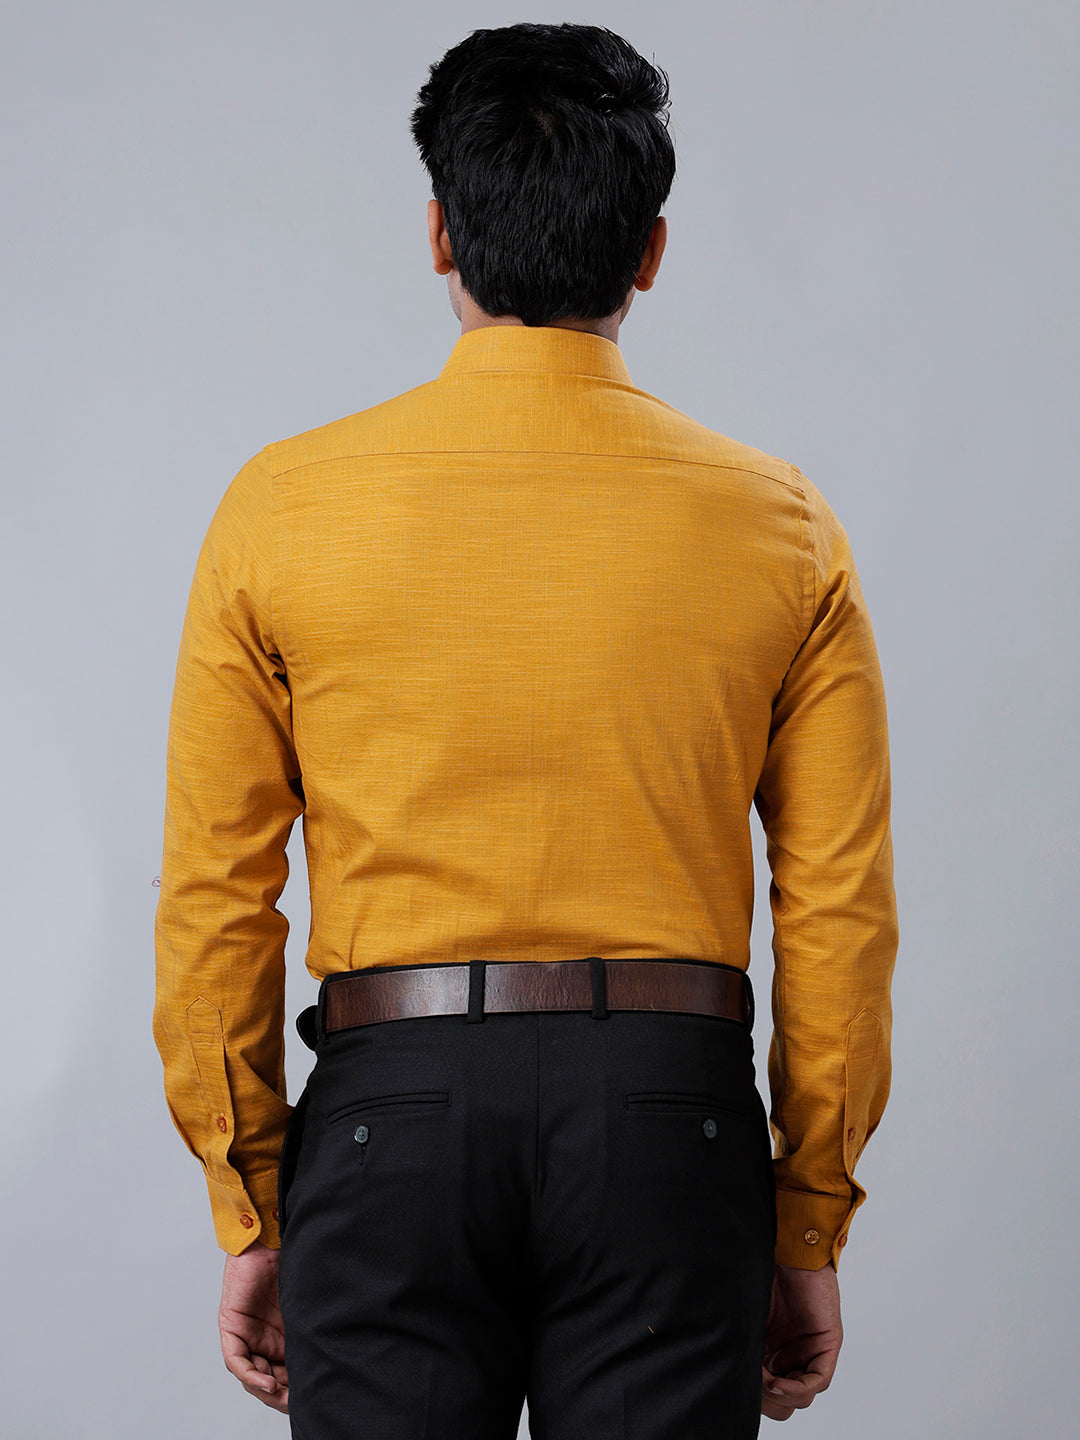 Mens Formal Shirt Full Sleeves Yellowish Brown CL2 GT32-Back view